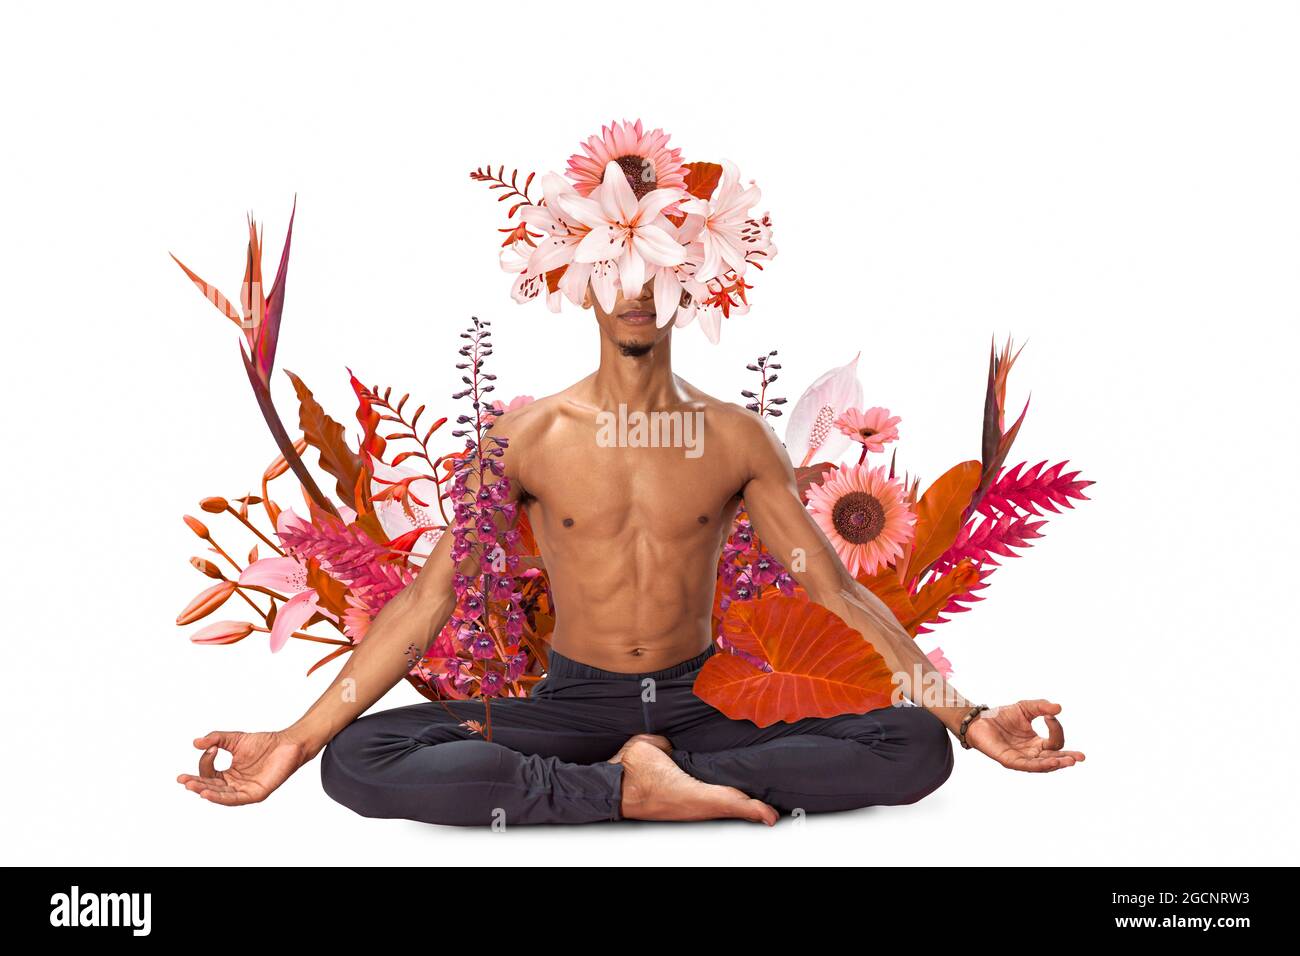 Abstract art design of young man doing yoga with flowers around body isolated on white background Stock Photo